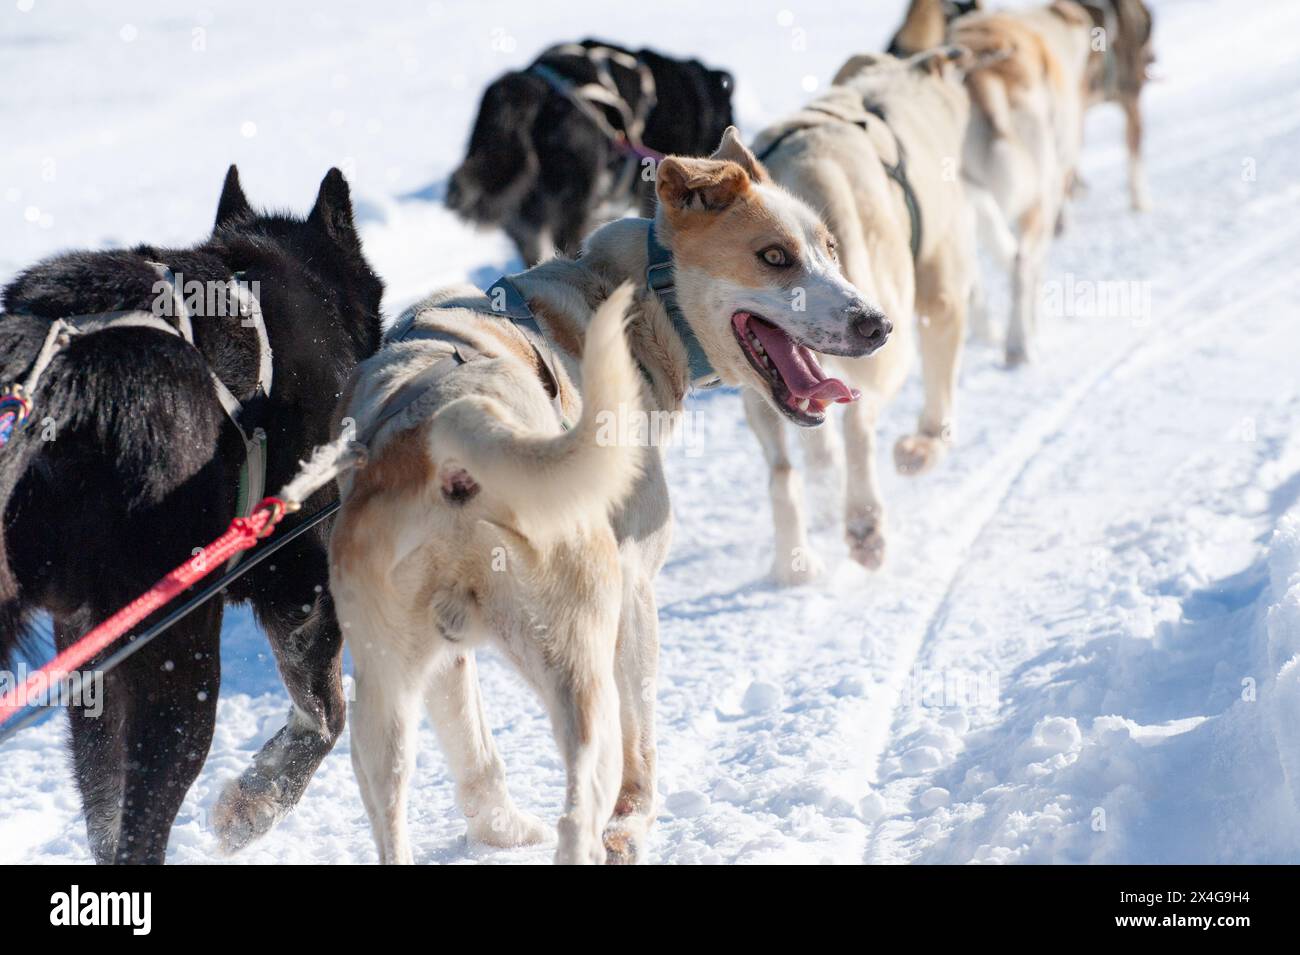 Energetic sled dog team in mid-action on a snowy trail Stock Photo